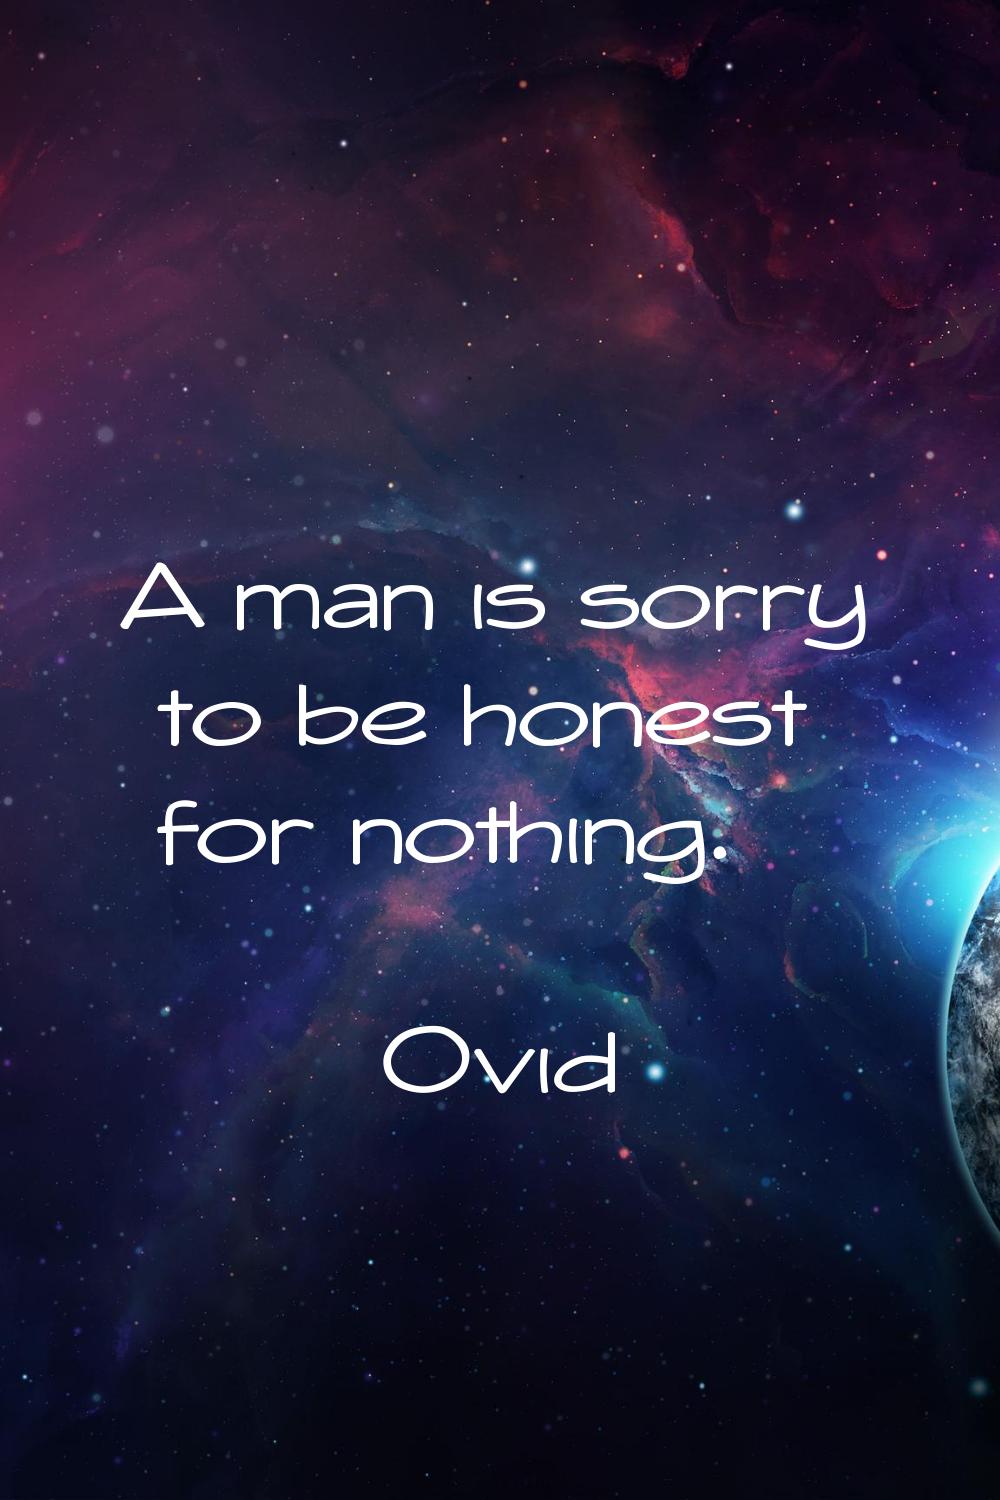 A man is sorry to be honest for nothing.